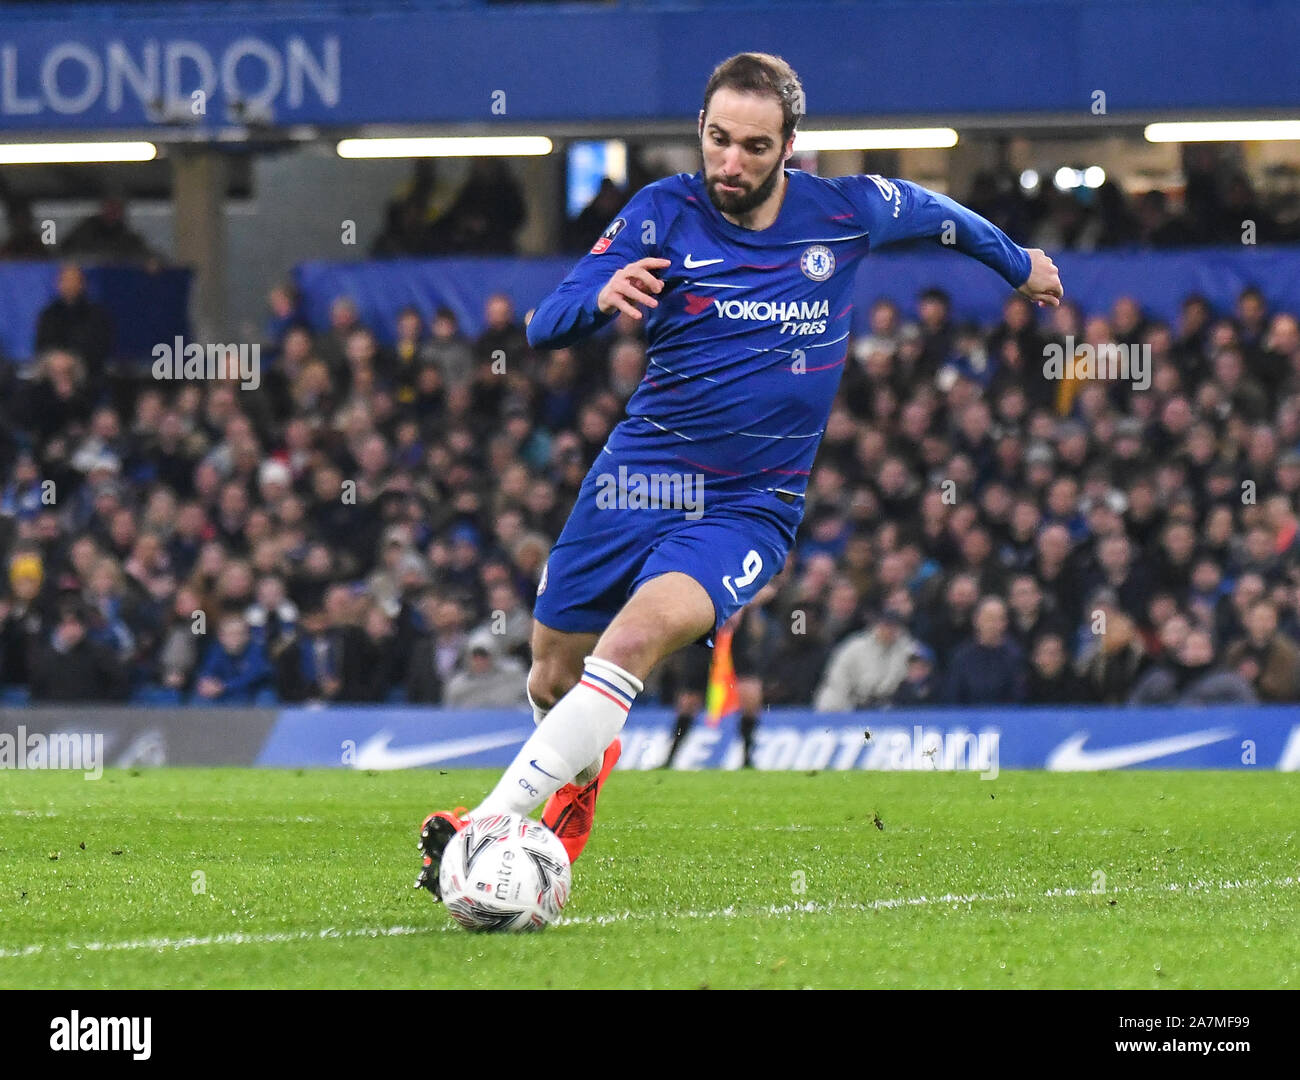 LONDON, ENGLAND - FEBRUARY 18, 2019: Gonzalo Higuain of Chelsea pictured during the 2018/19 FA Cup Fifth Round game between Chelsea FC and Manchester United at Stamford Bridge. Stock Photo